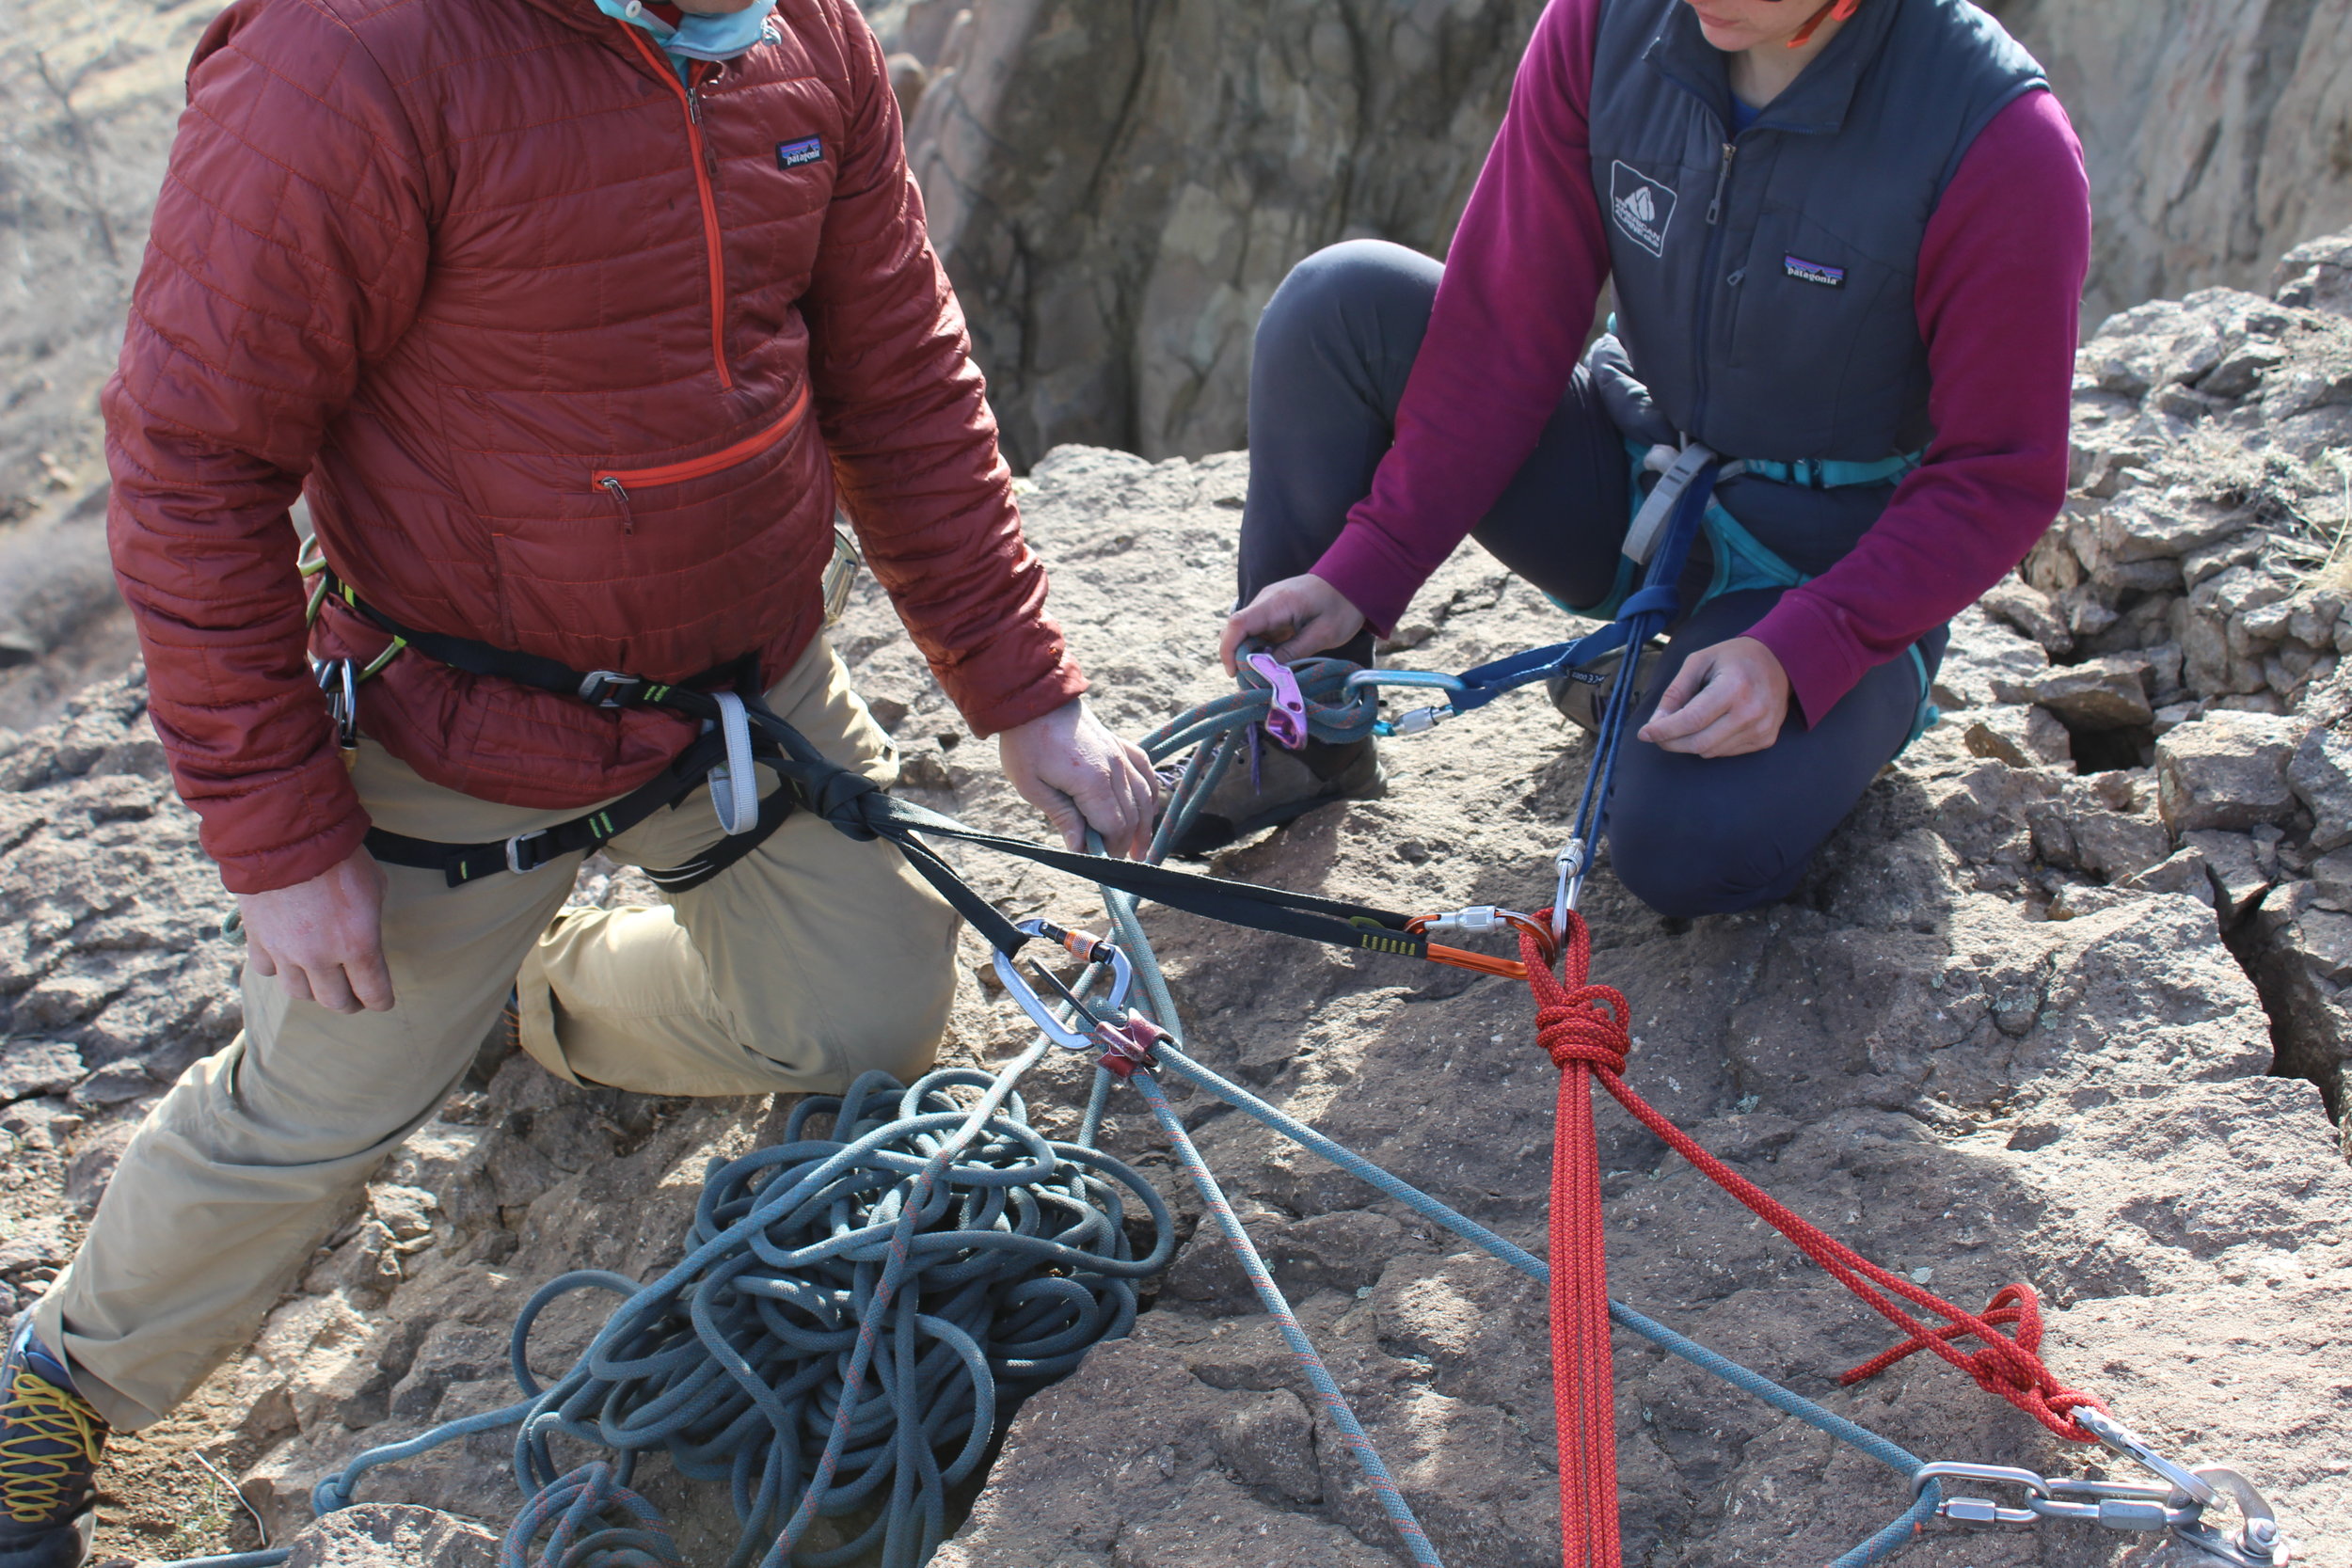 With their back turned towards a precipitous cliff's edge and their attention focused on setup tasks, these climbers are using technical security (a tether and locking carabiner) to stay secured during setup.&nbsp;